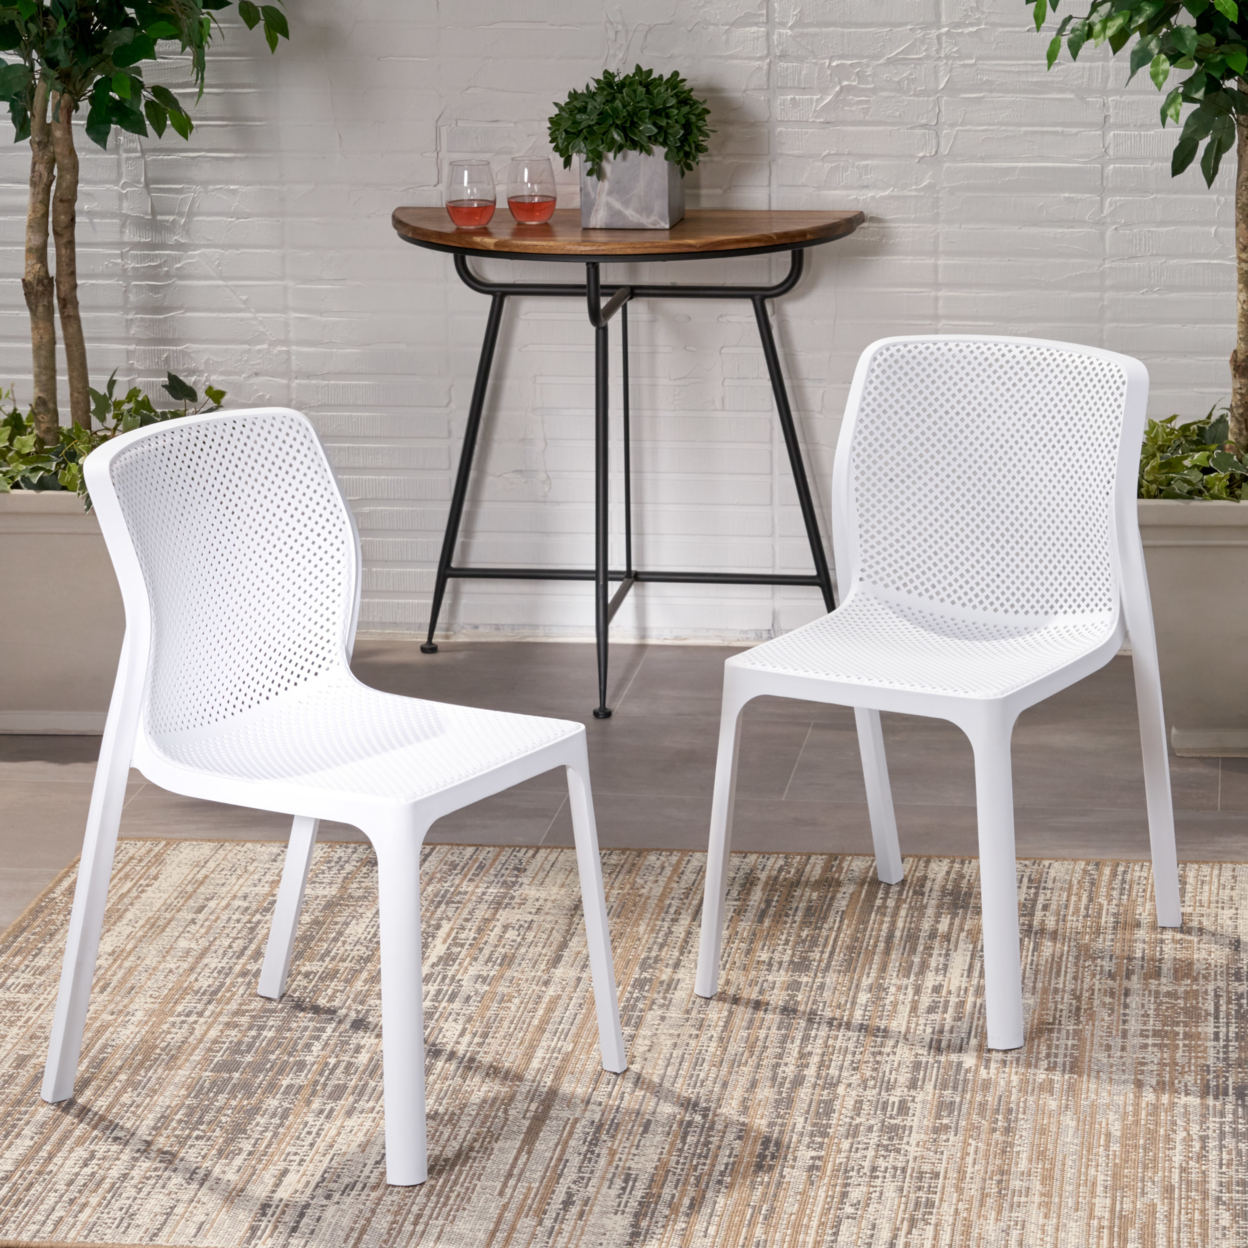 Chelsea Outdoor Plastic Chairs (Set Of 2) - White